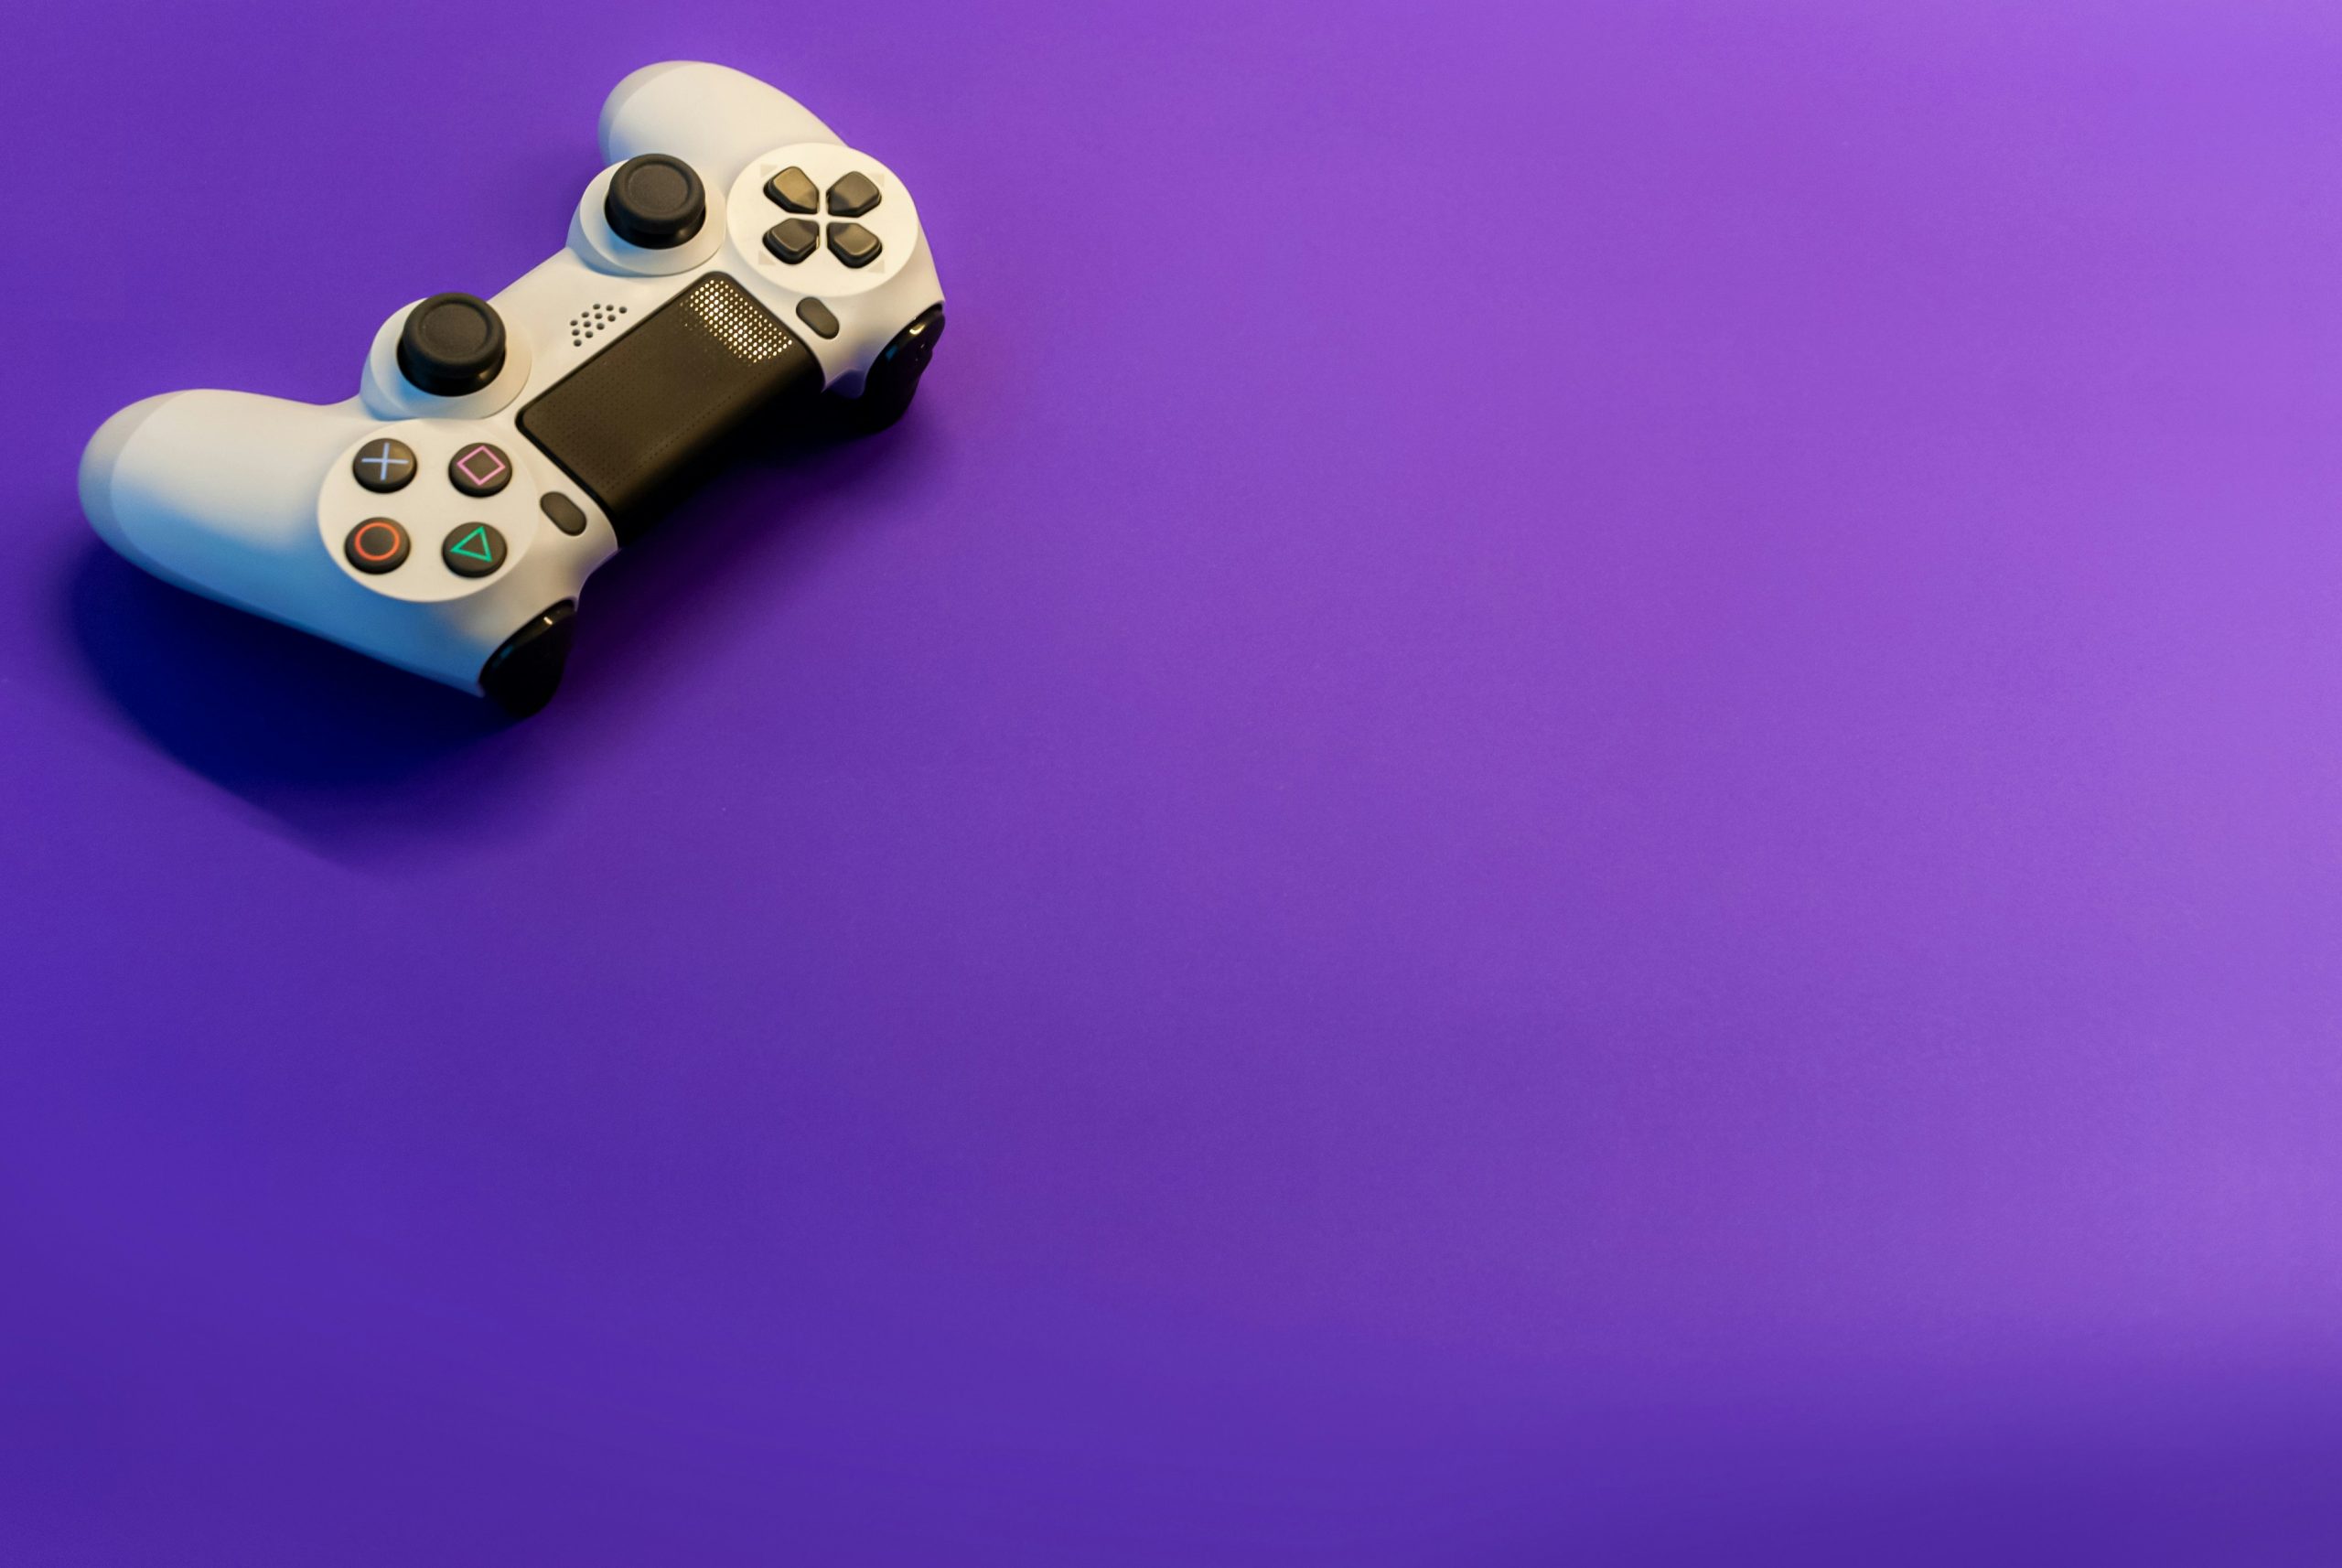 Game On: Earn PlayStation Credits Without Spending a Dime